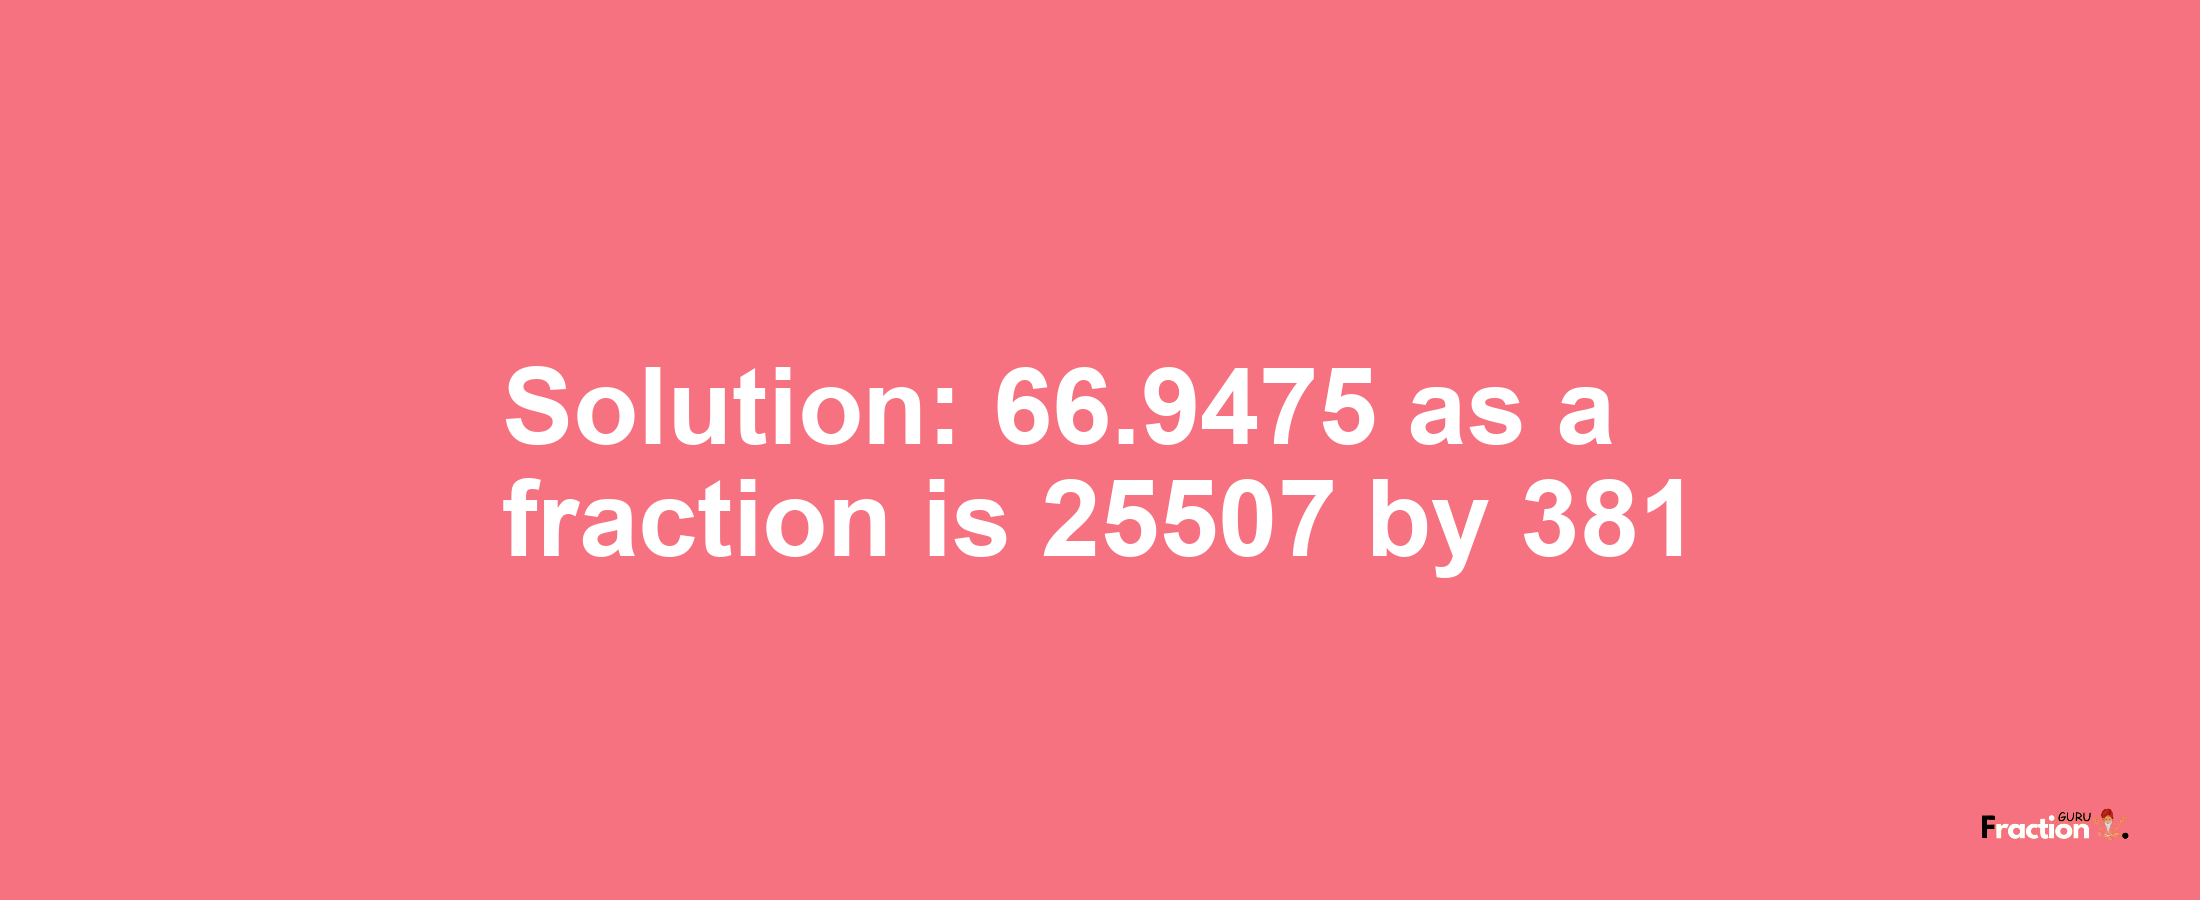 Solution:66.9475 as a fraction is 25507/381